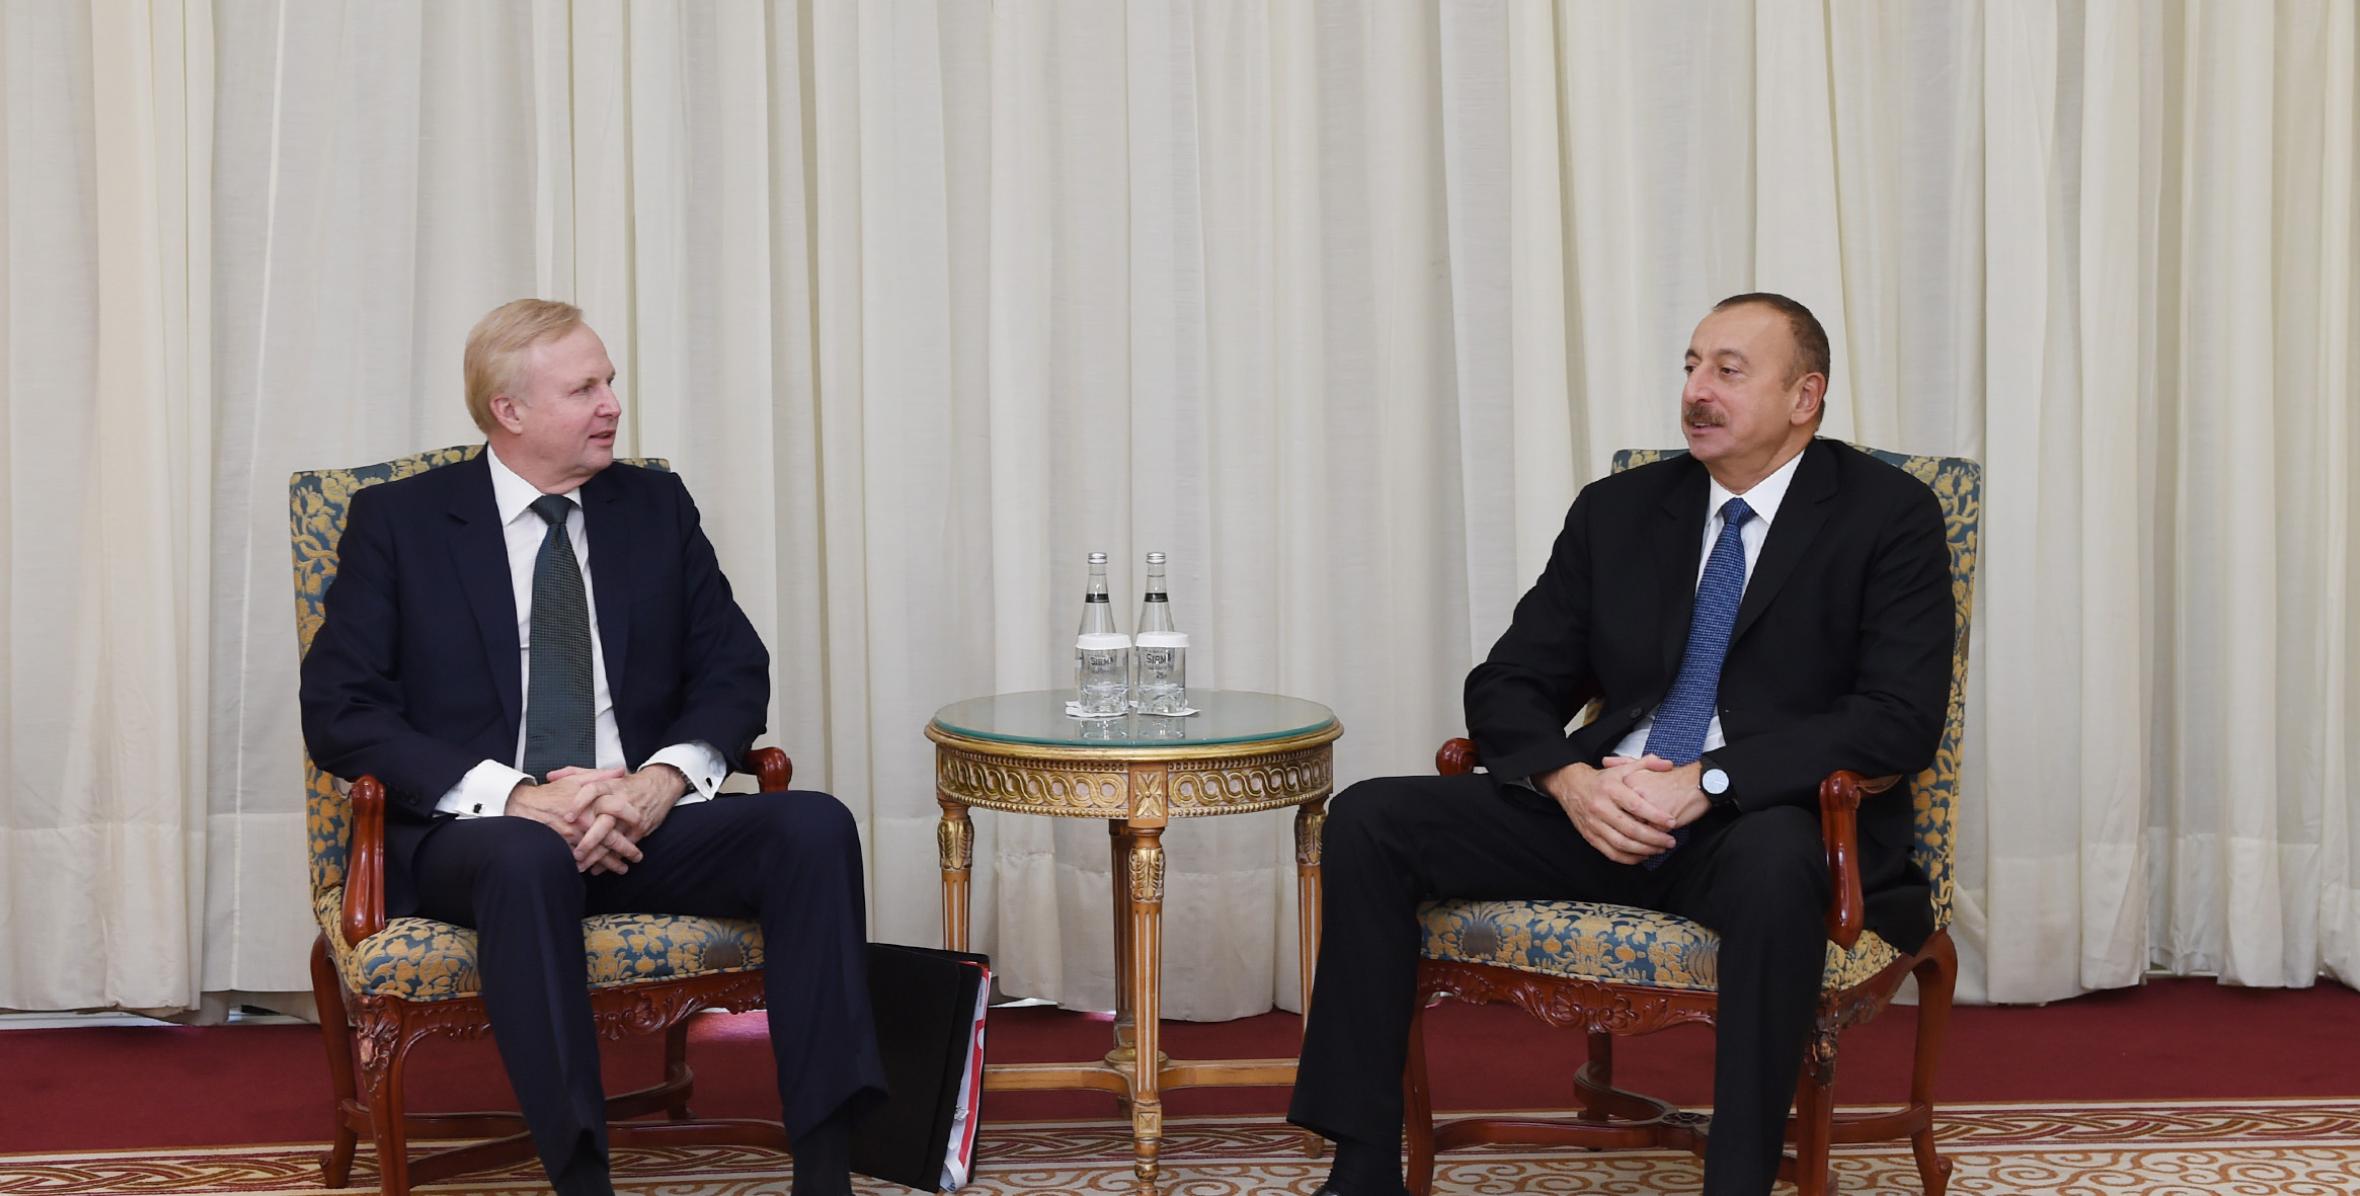 Ilham Aliyev met with BP Chief Executive Officer in Istanbul